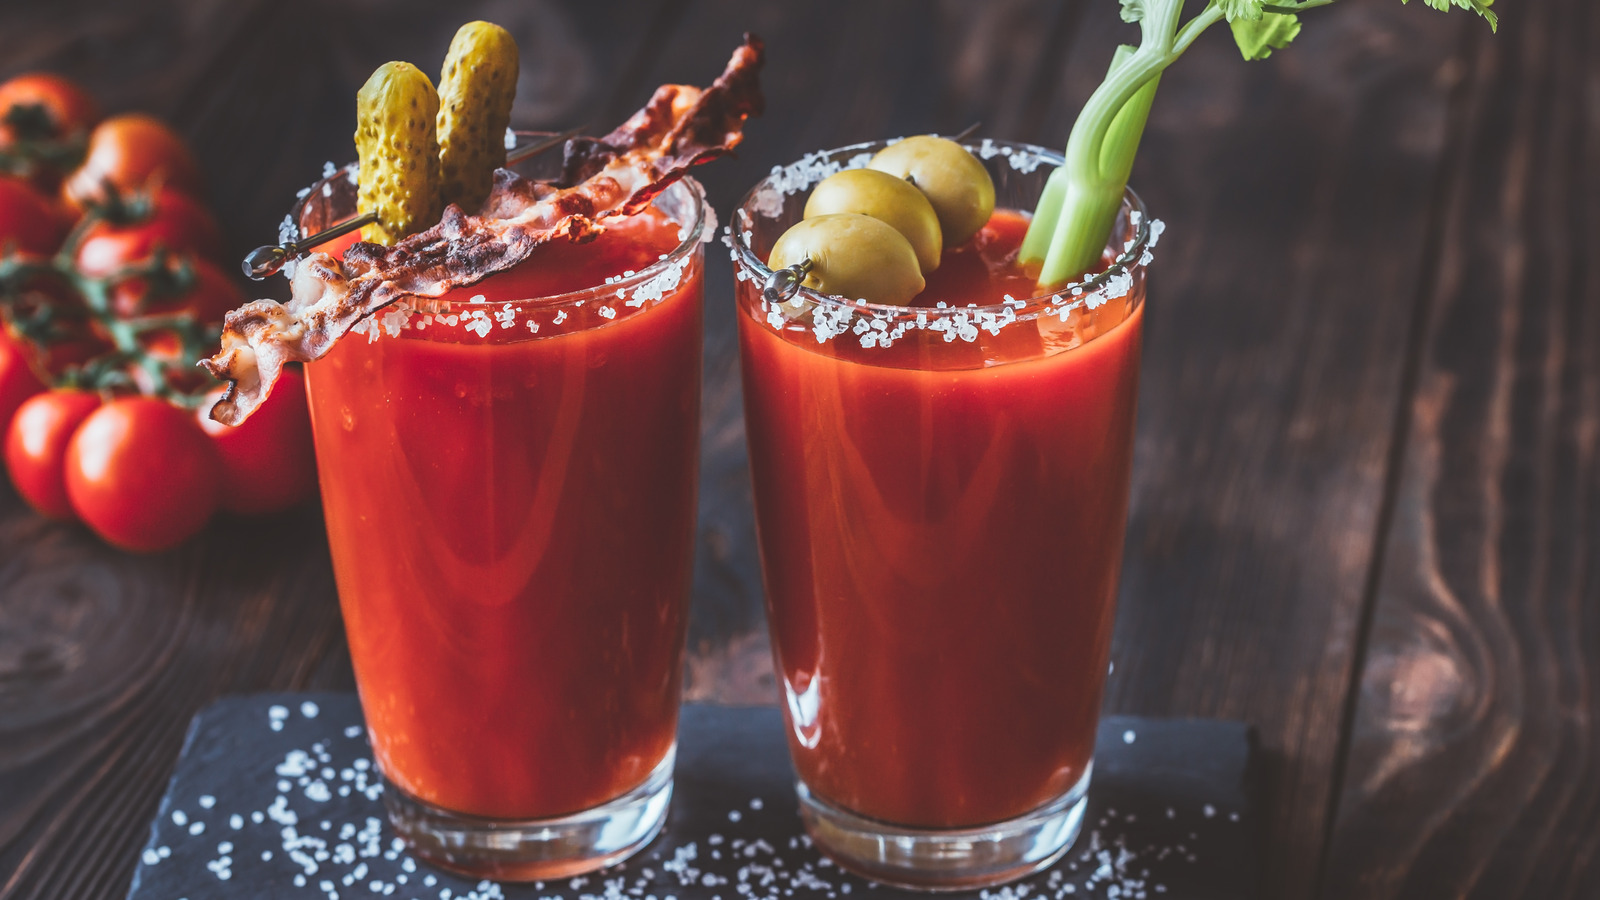 How a Little Beef Broth Can Transform Your Bloody Mary